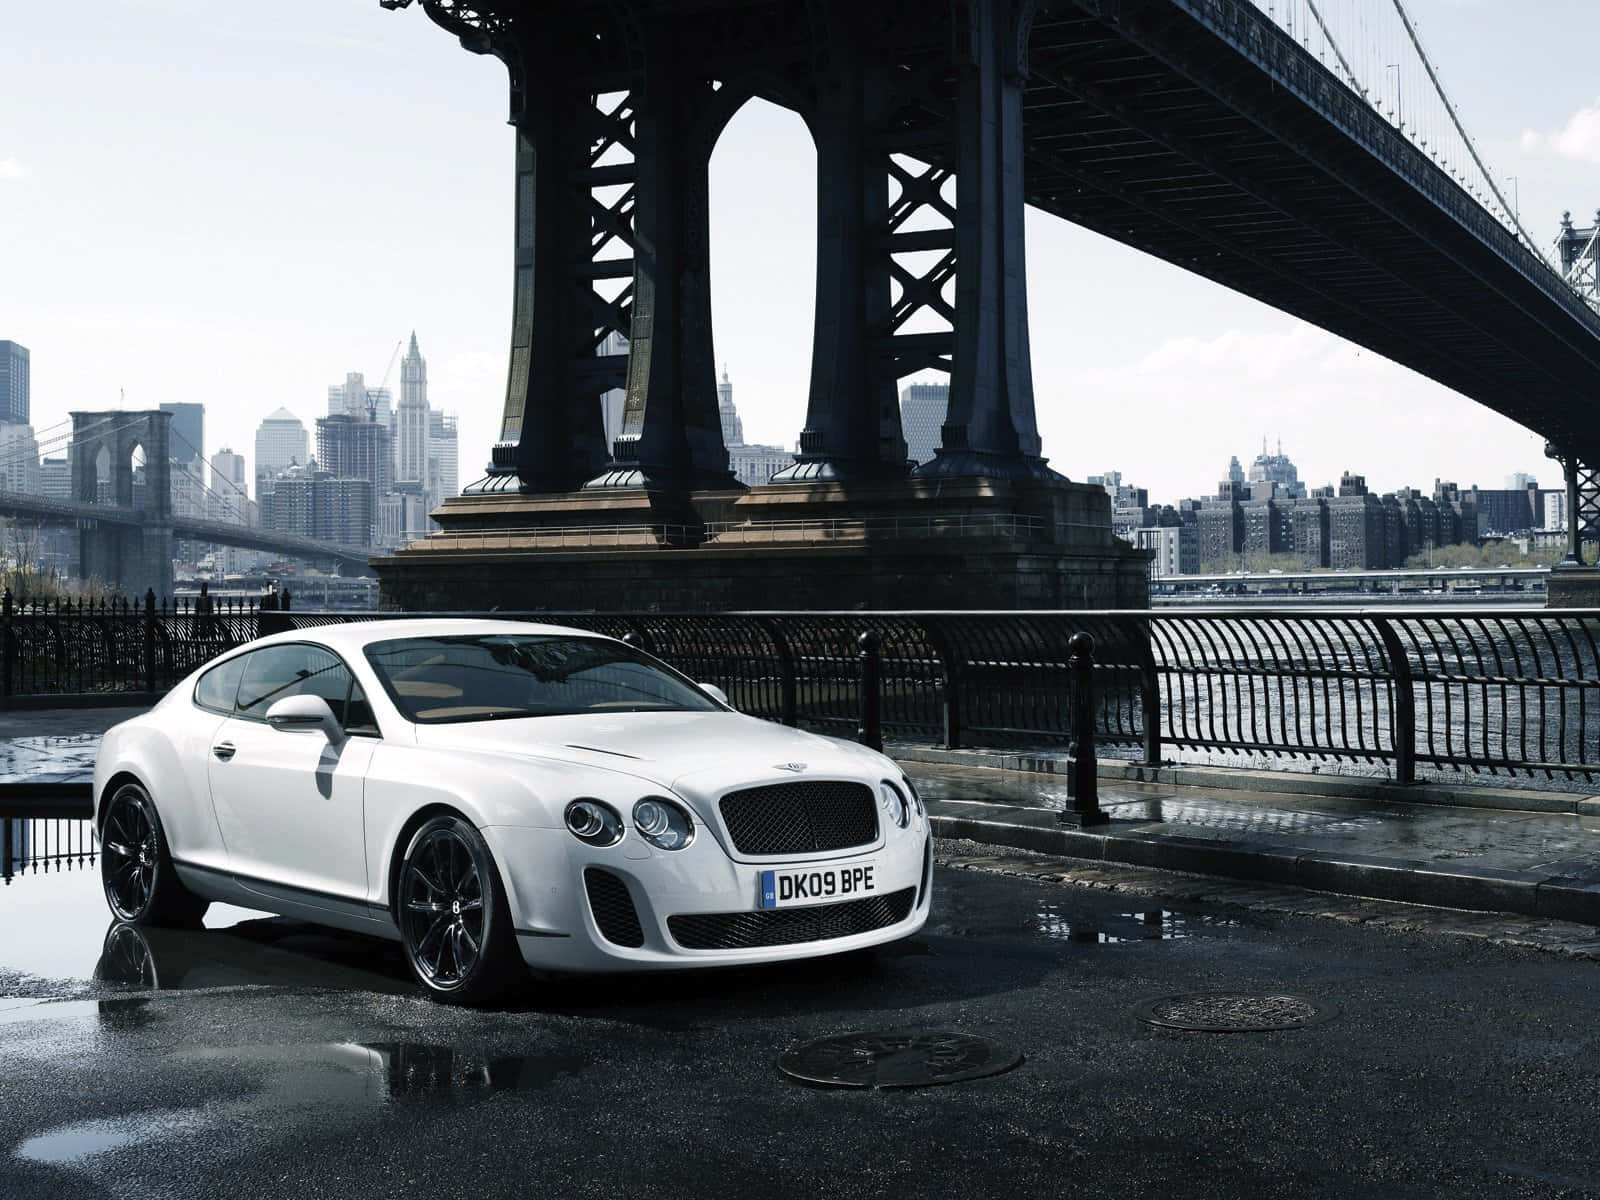 Luxurious Bentley Continental GT showcasing its sleek design and sophisticated features Wallpaper